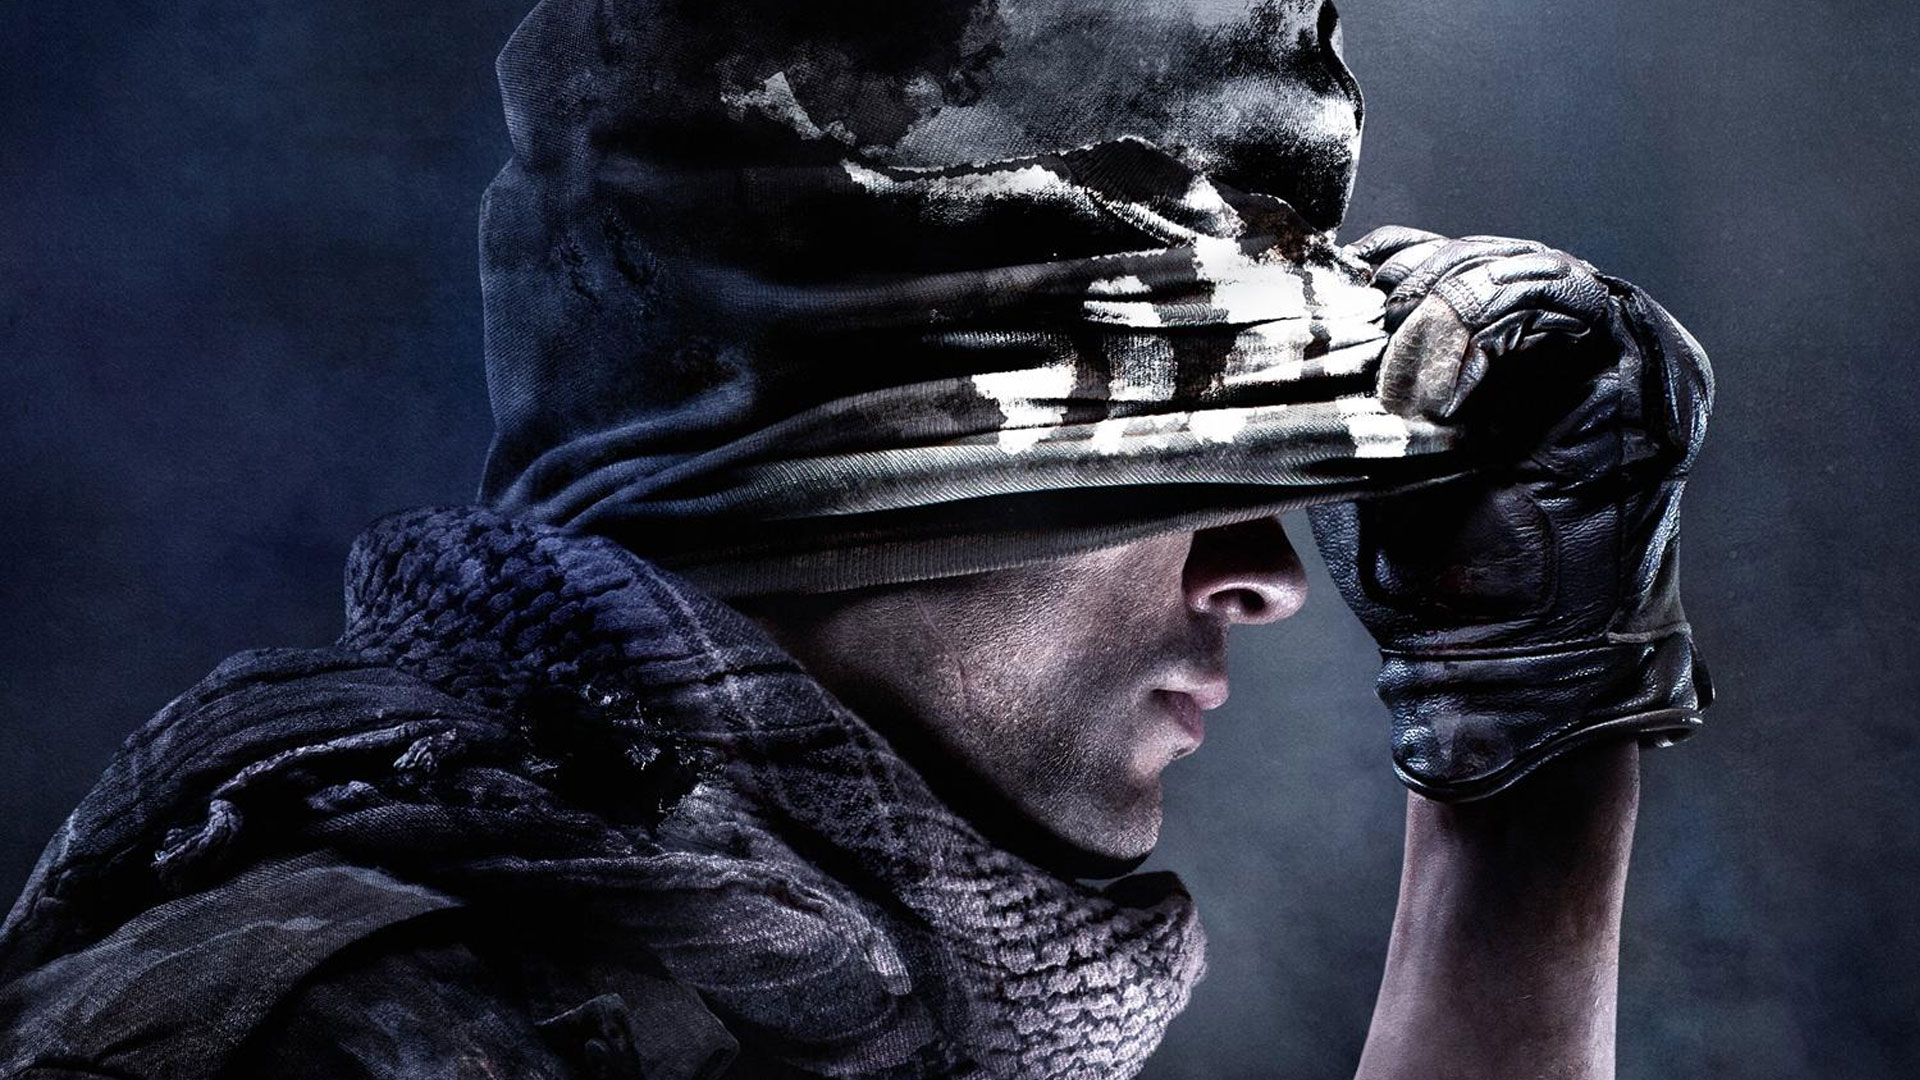 Call of Duty Ghosts Wallpaper in HD Page 2 1920x1080